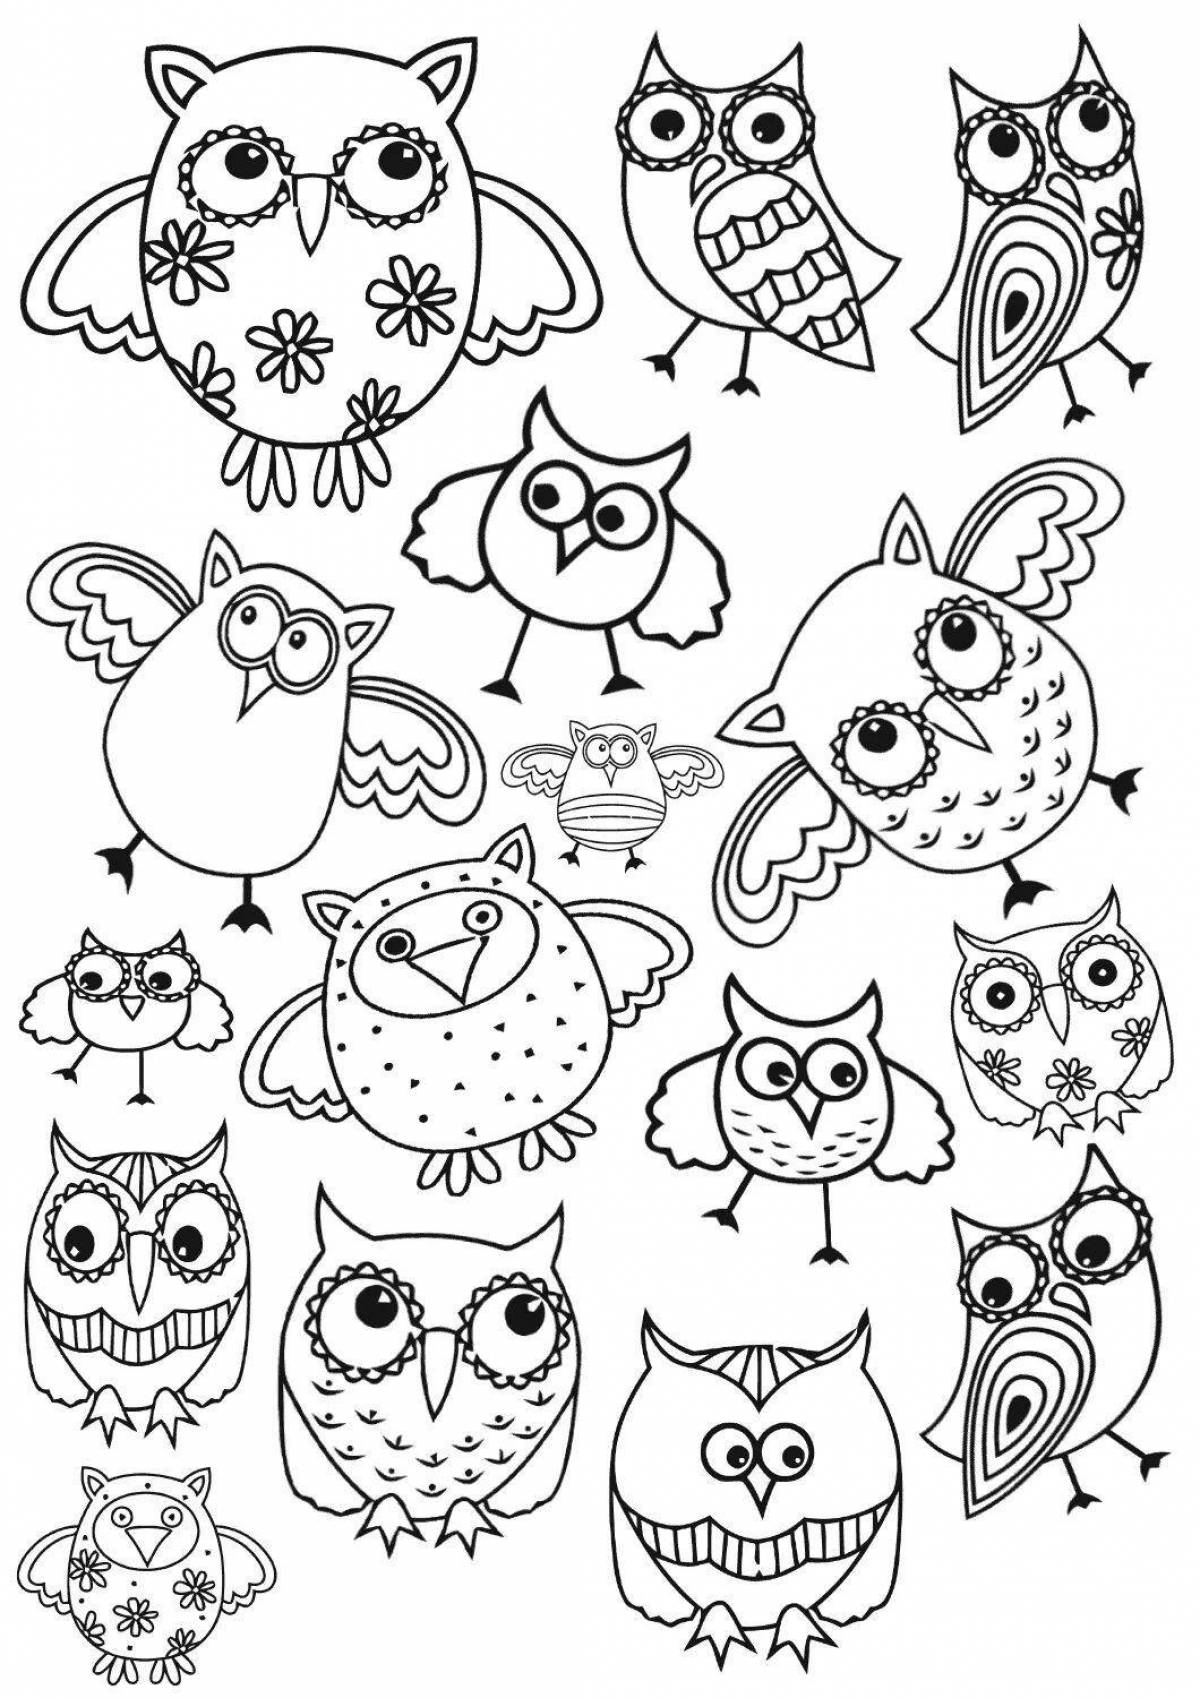 Funny coloring pages, small drawings for stickers